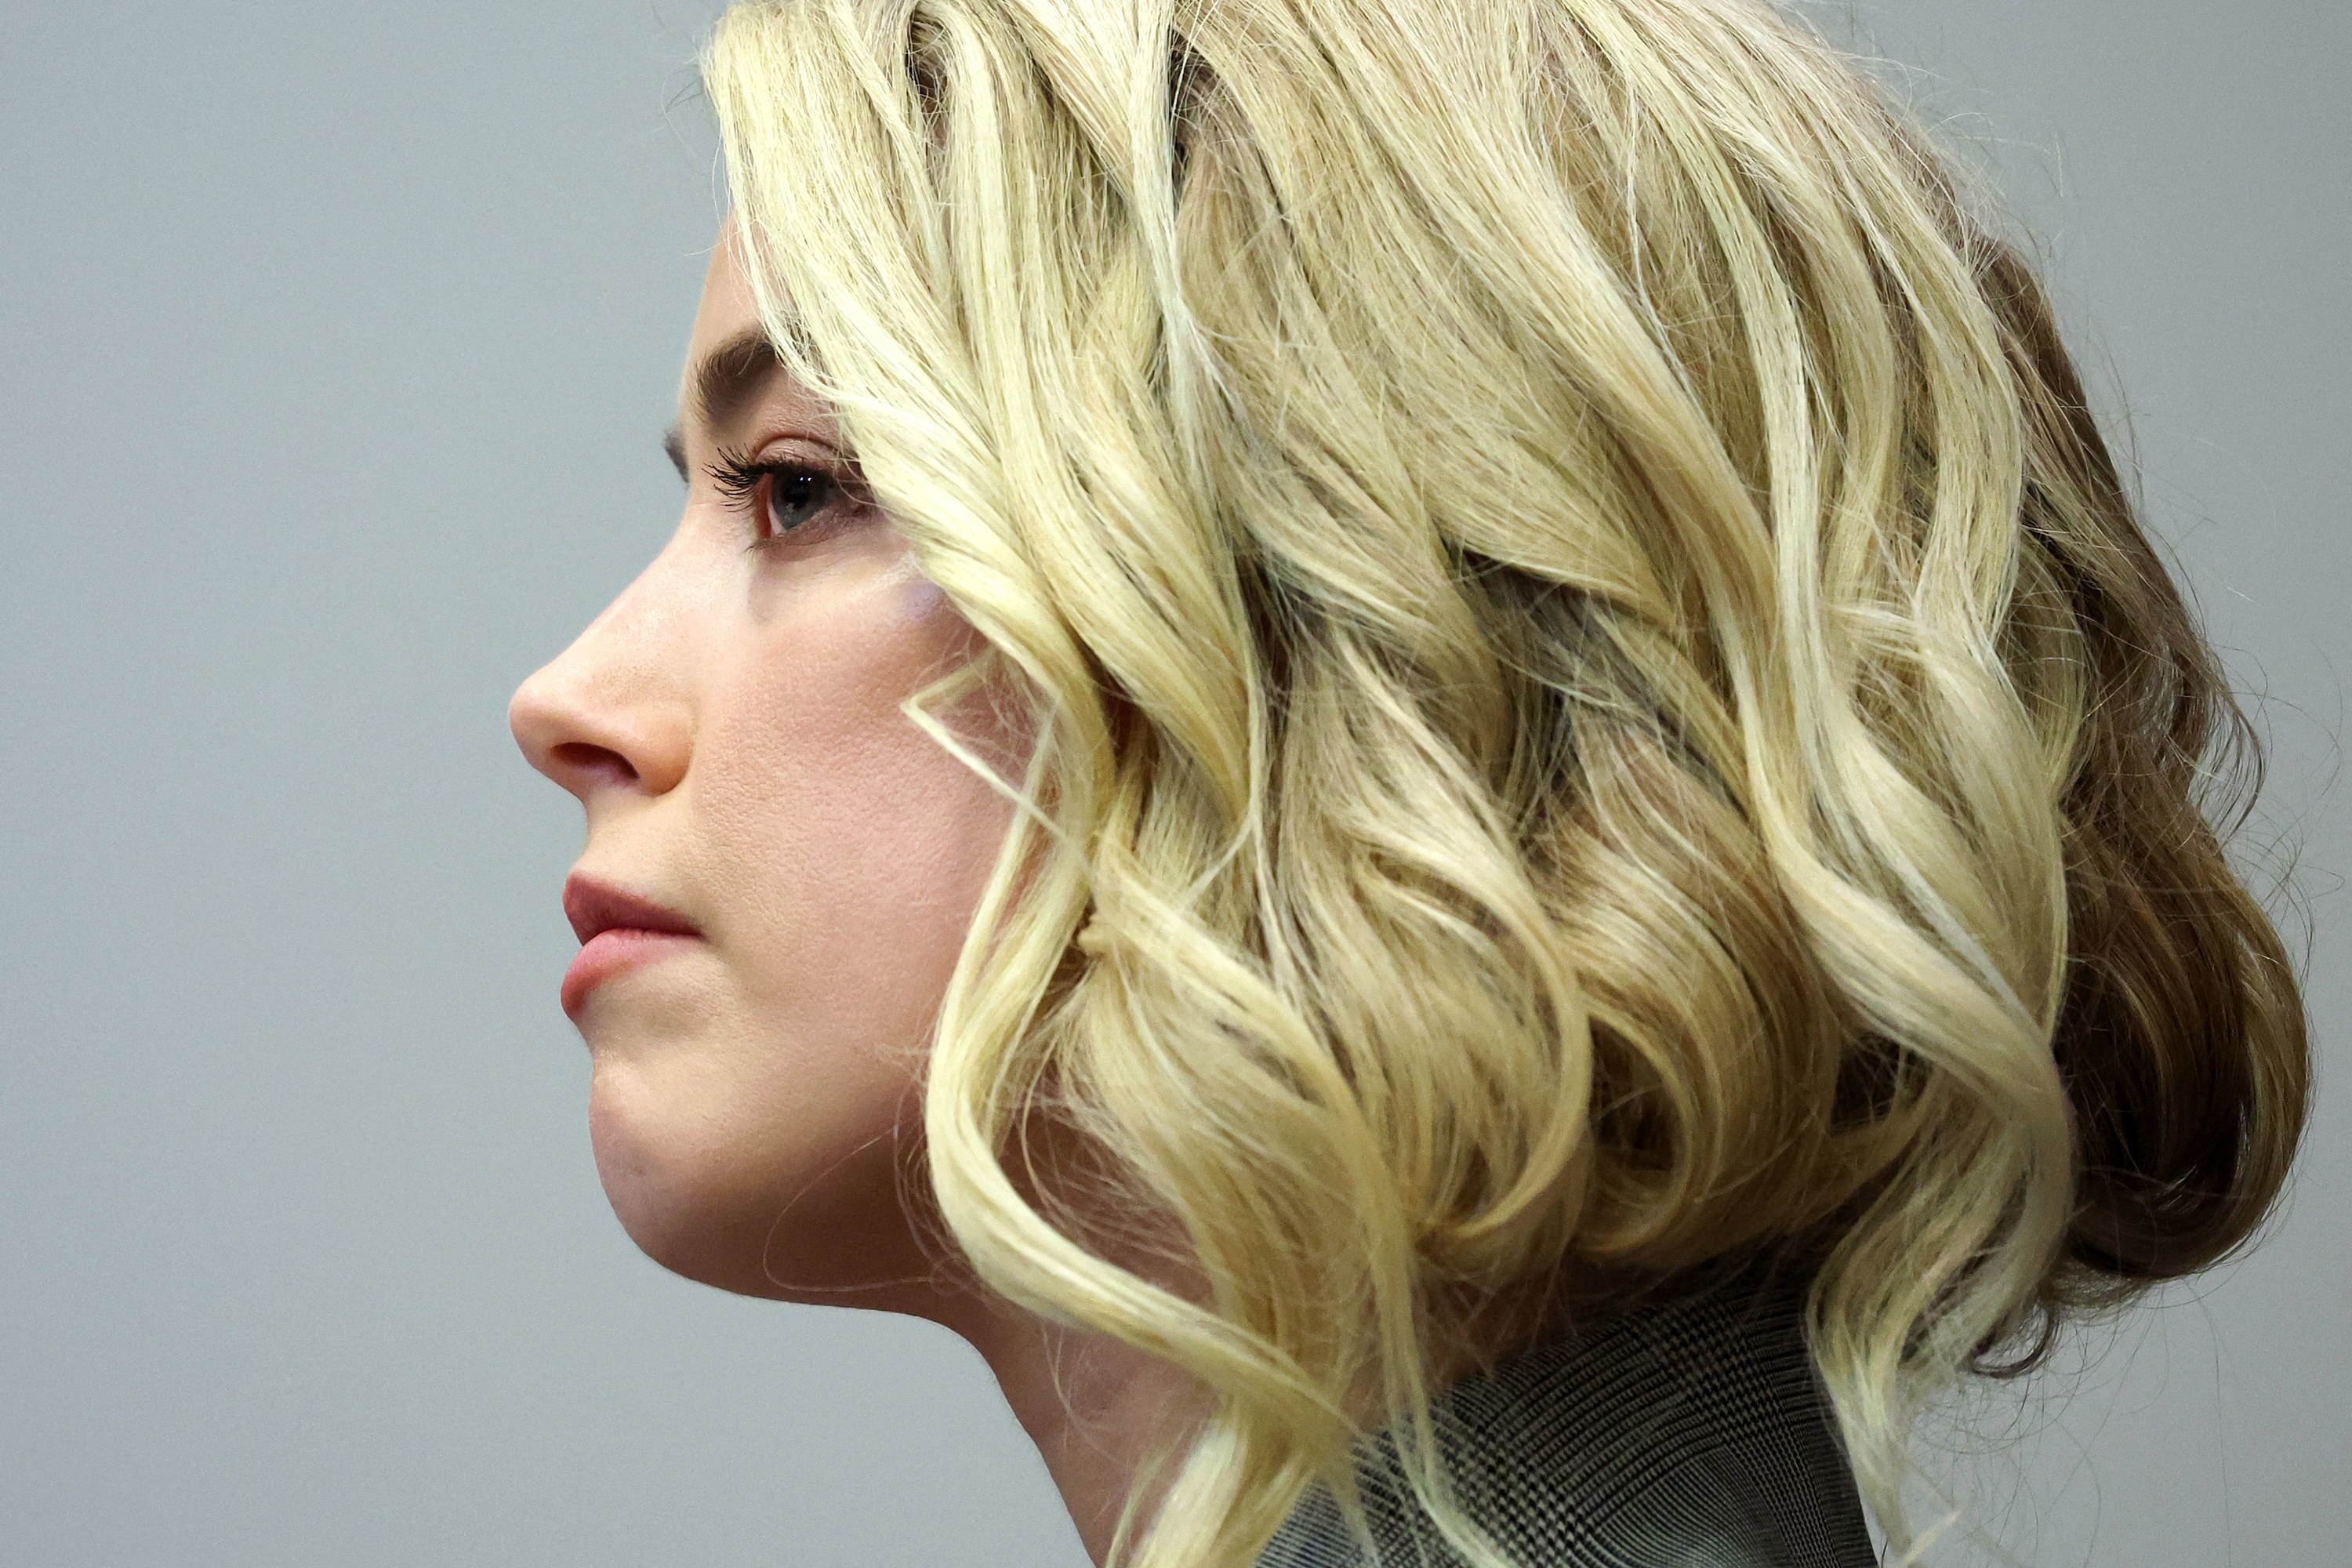 Profile view of Amber in court